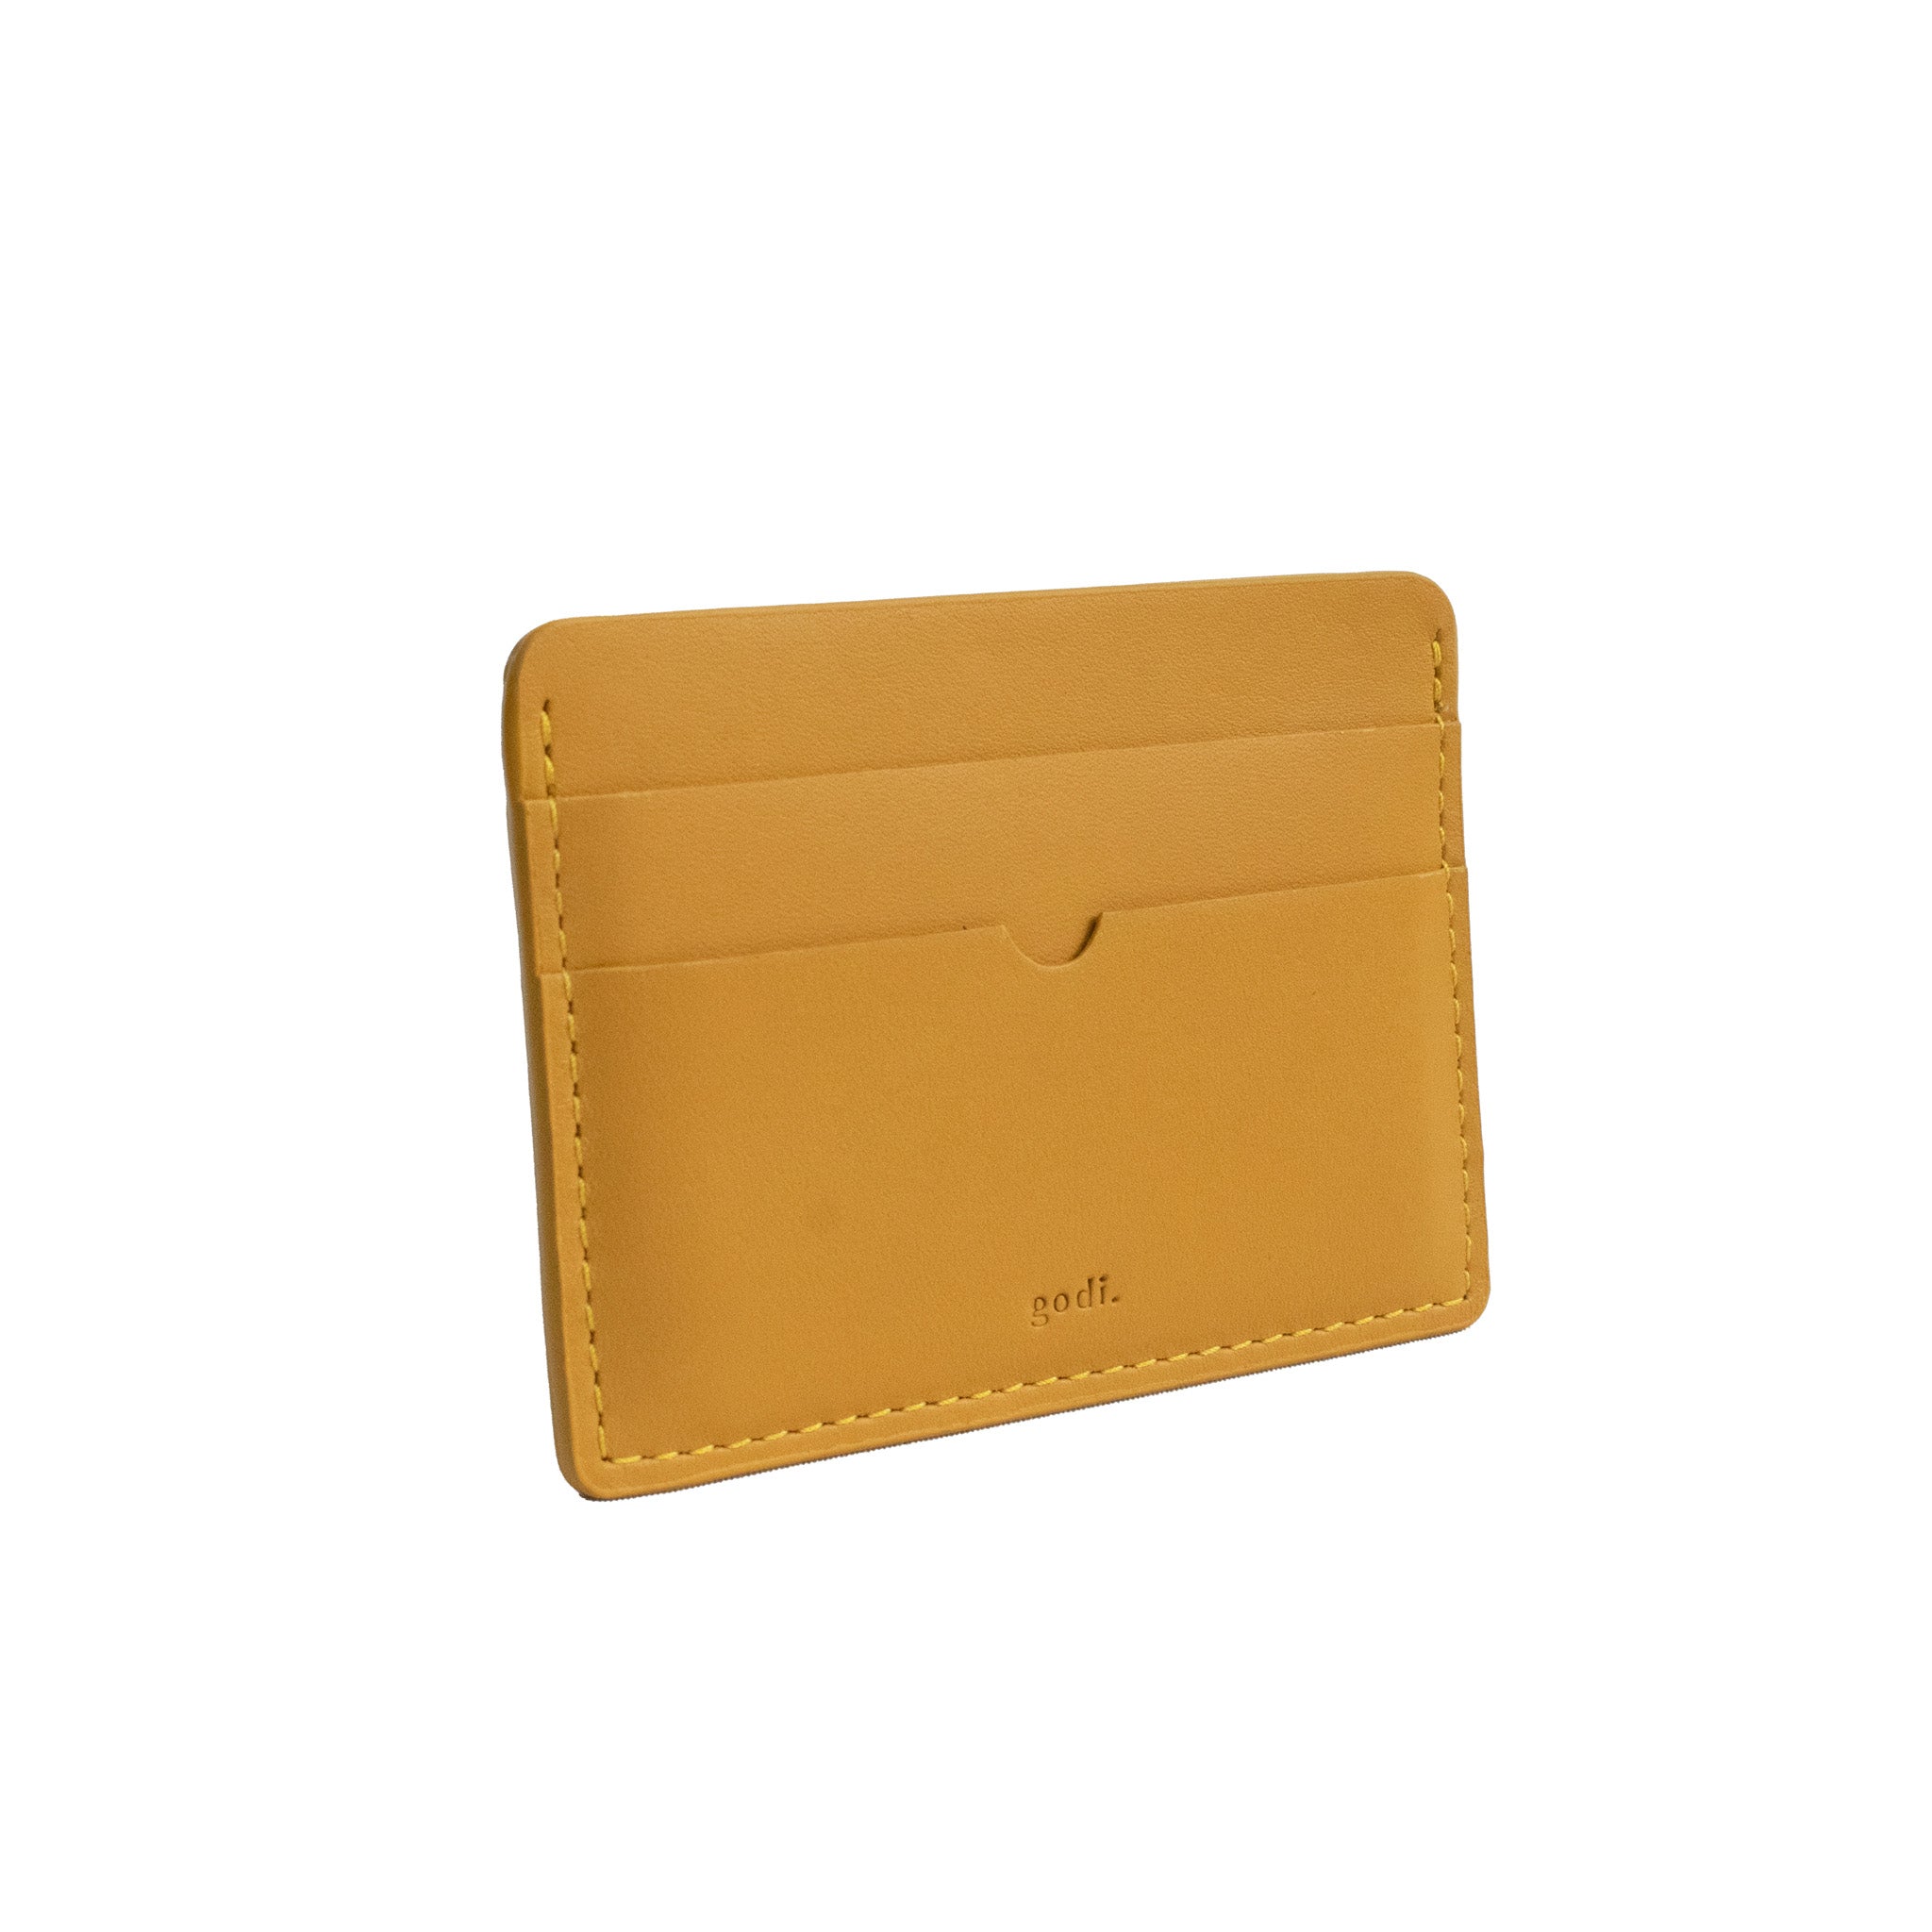 Card Case in Amber Yellow - Capsule Collection